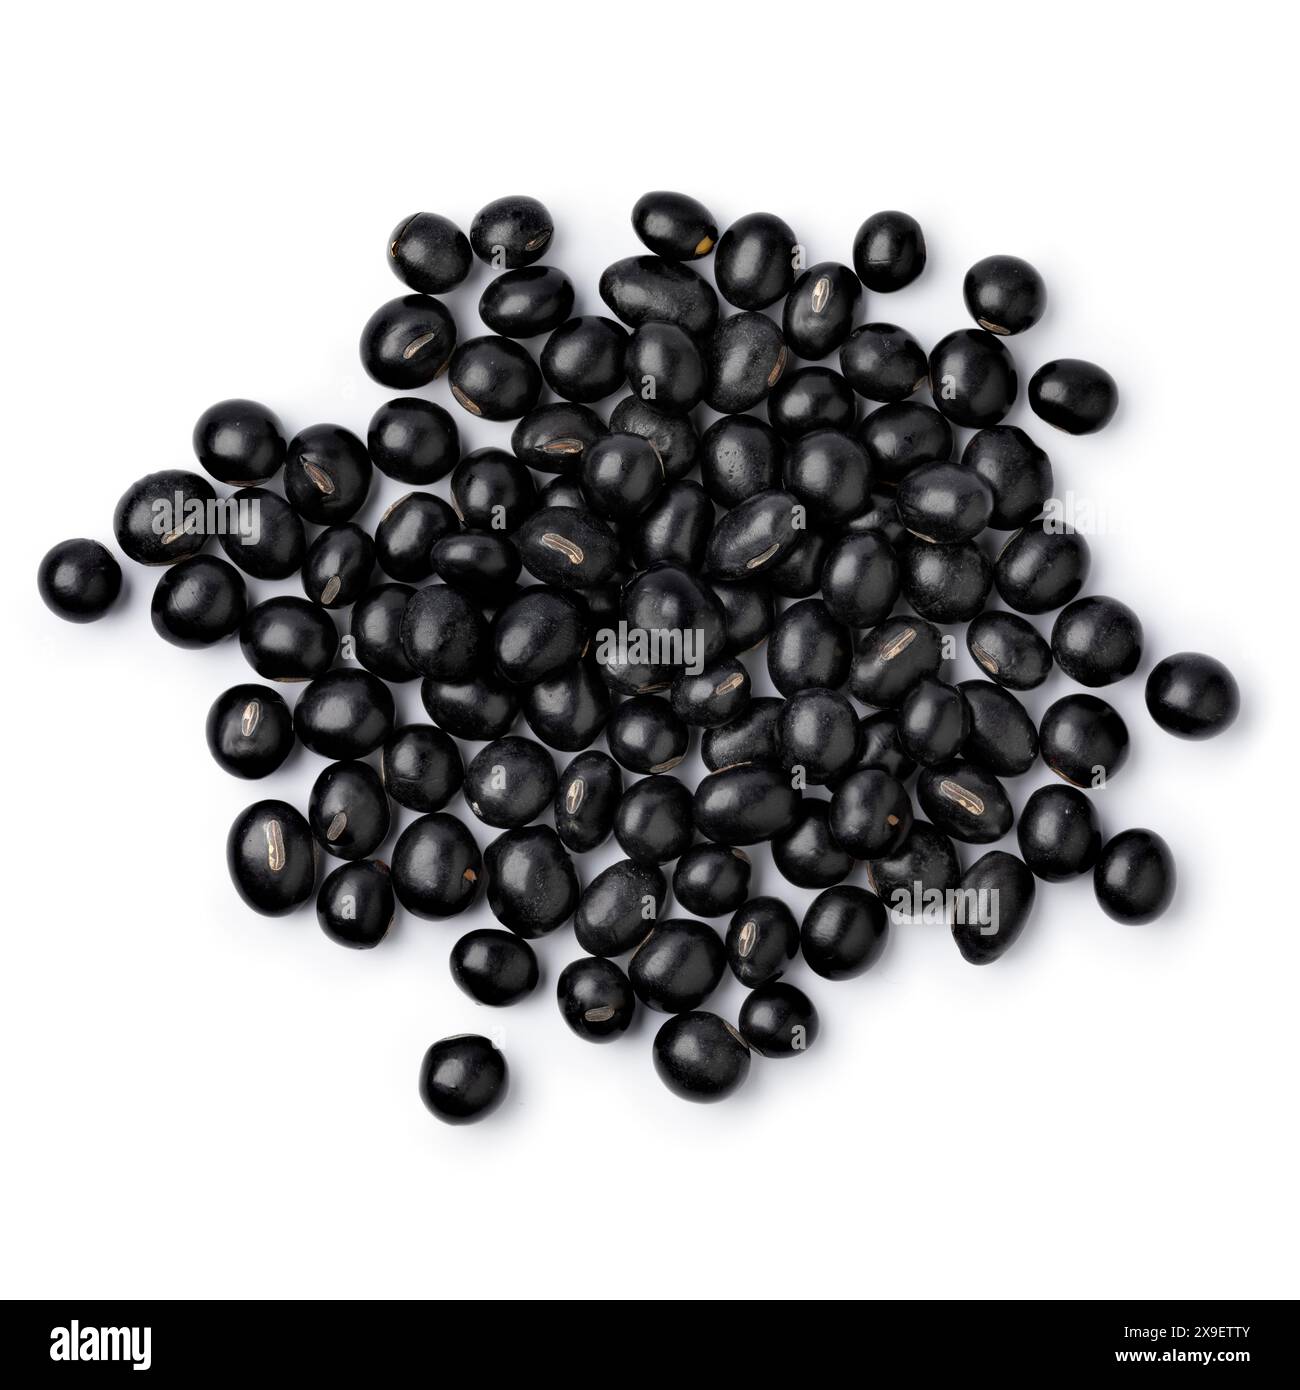 Dried black beans close up isolated on white background Stock Photo